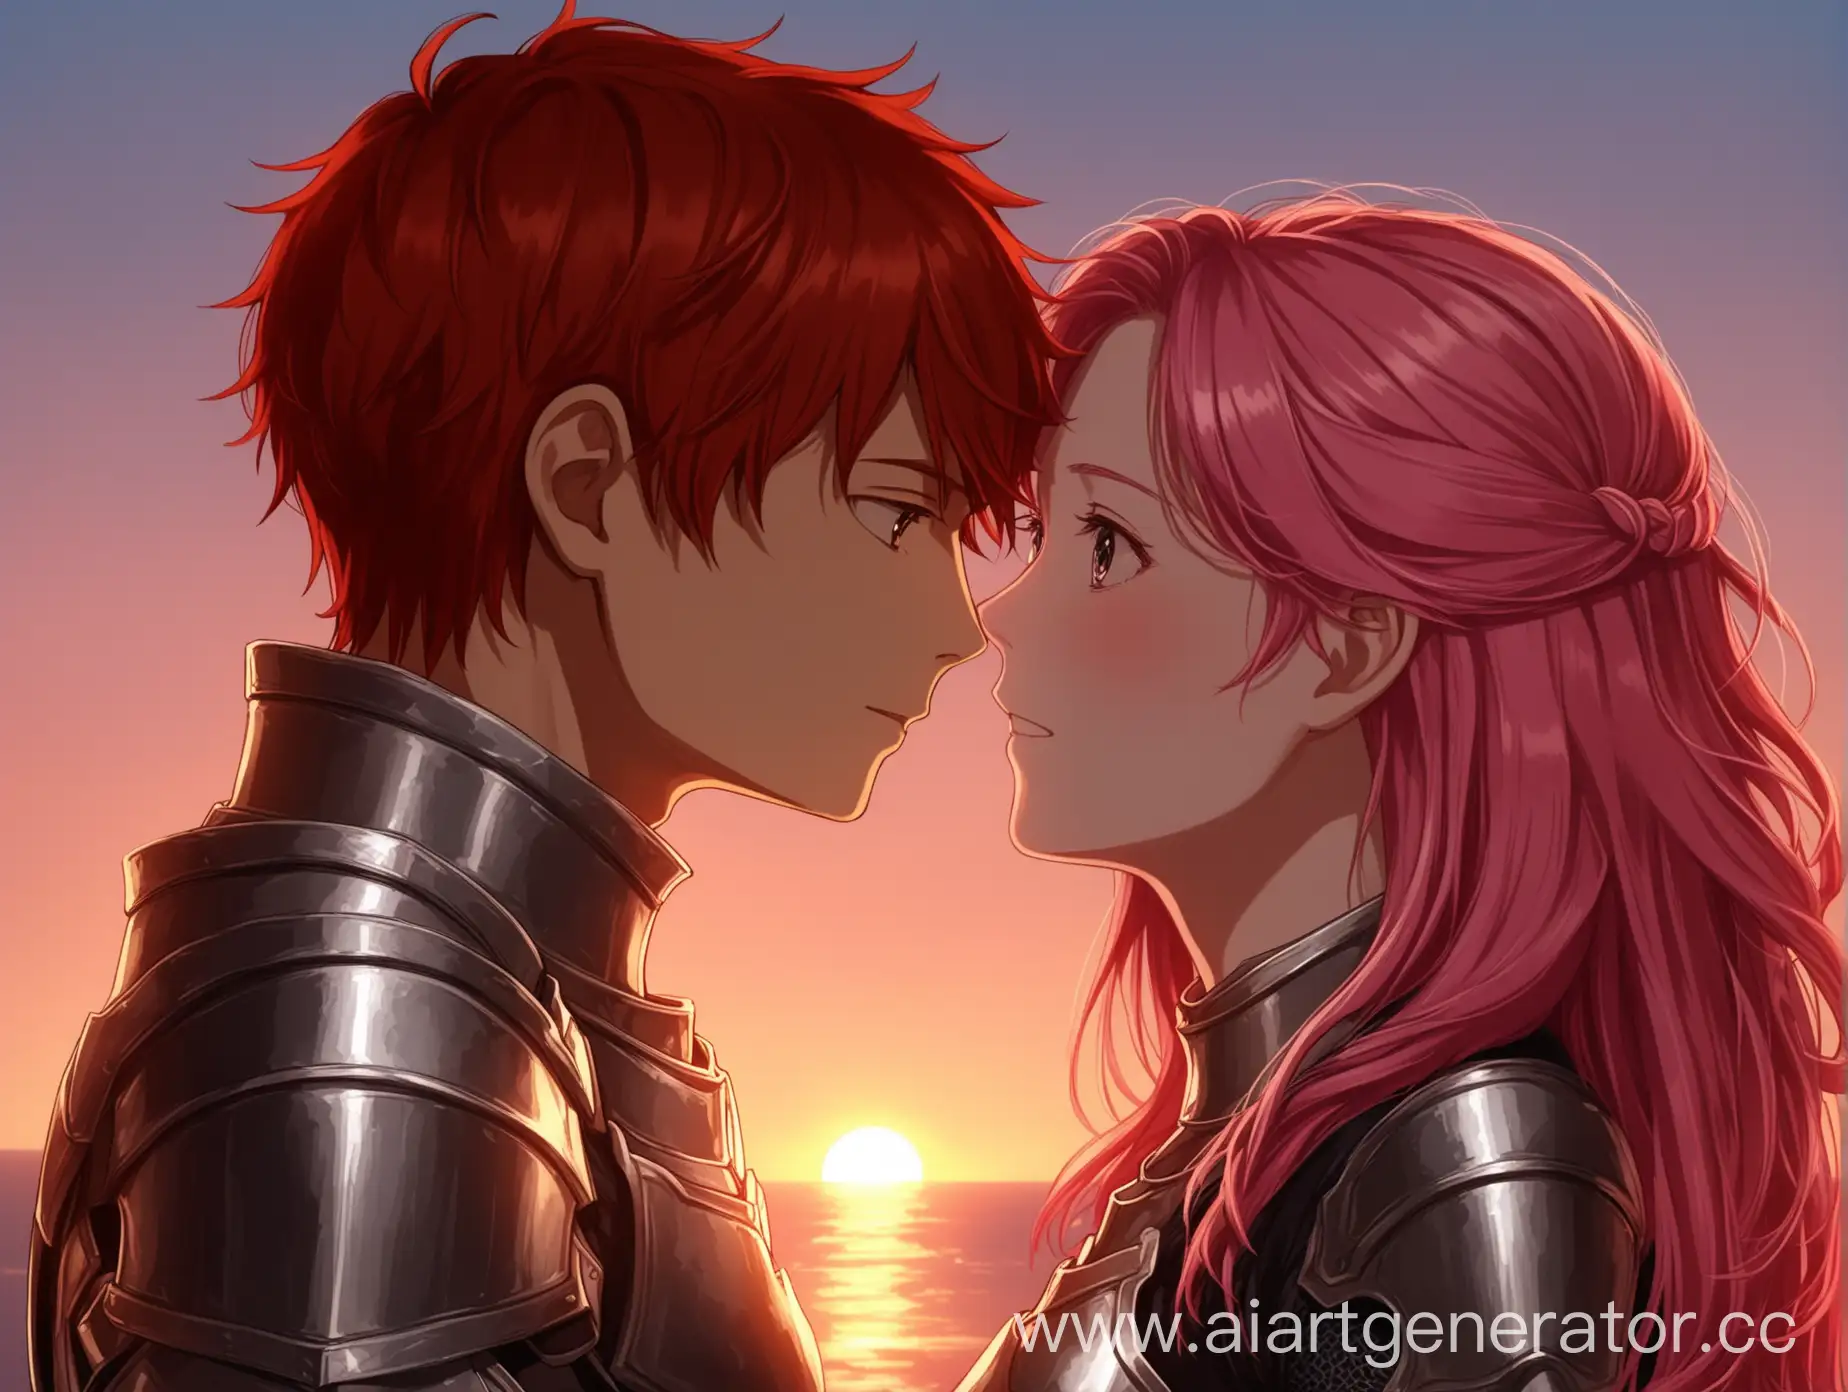 Redheaded-Boy-and-PinkHaired-Girl-Embrace-at-Sunset